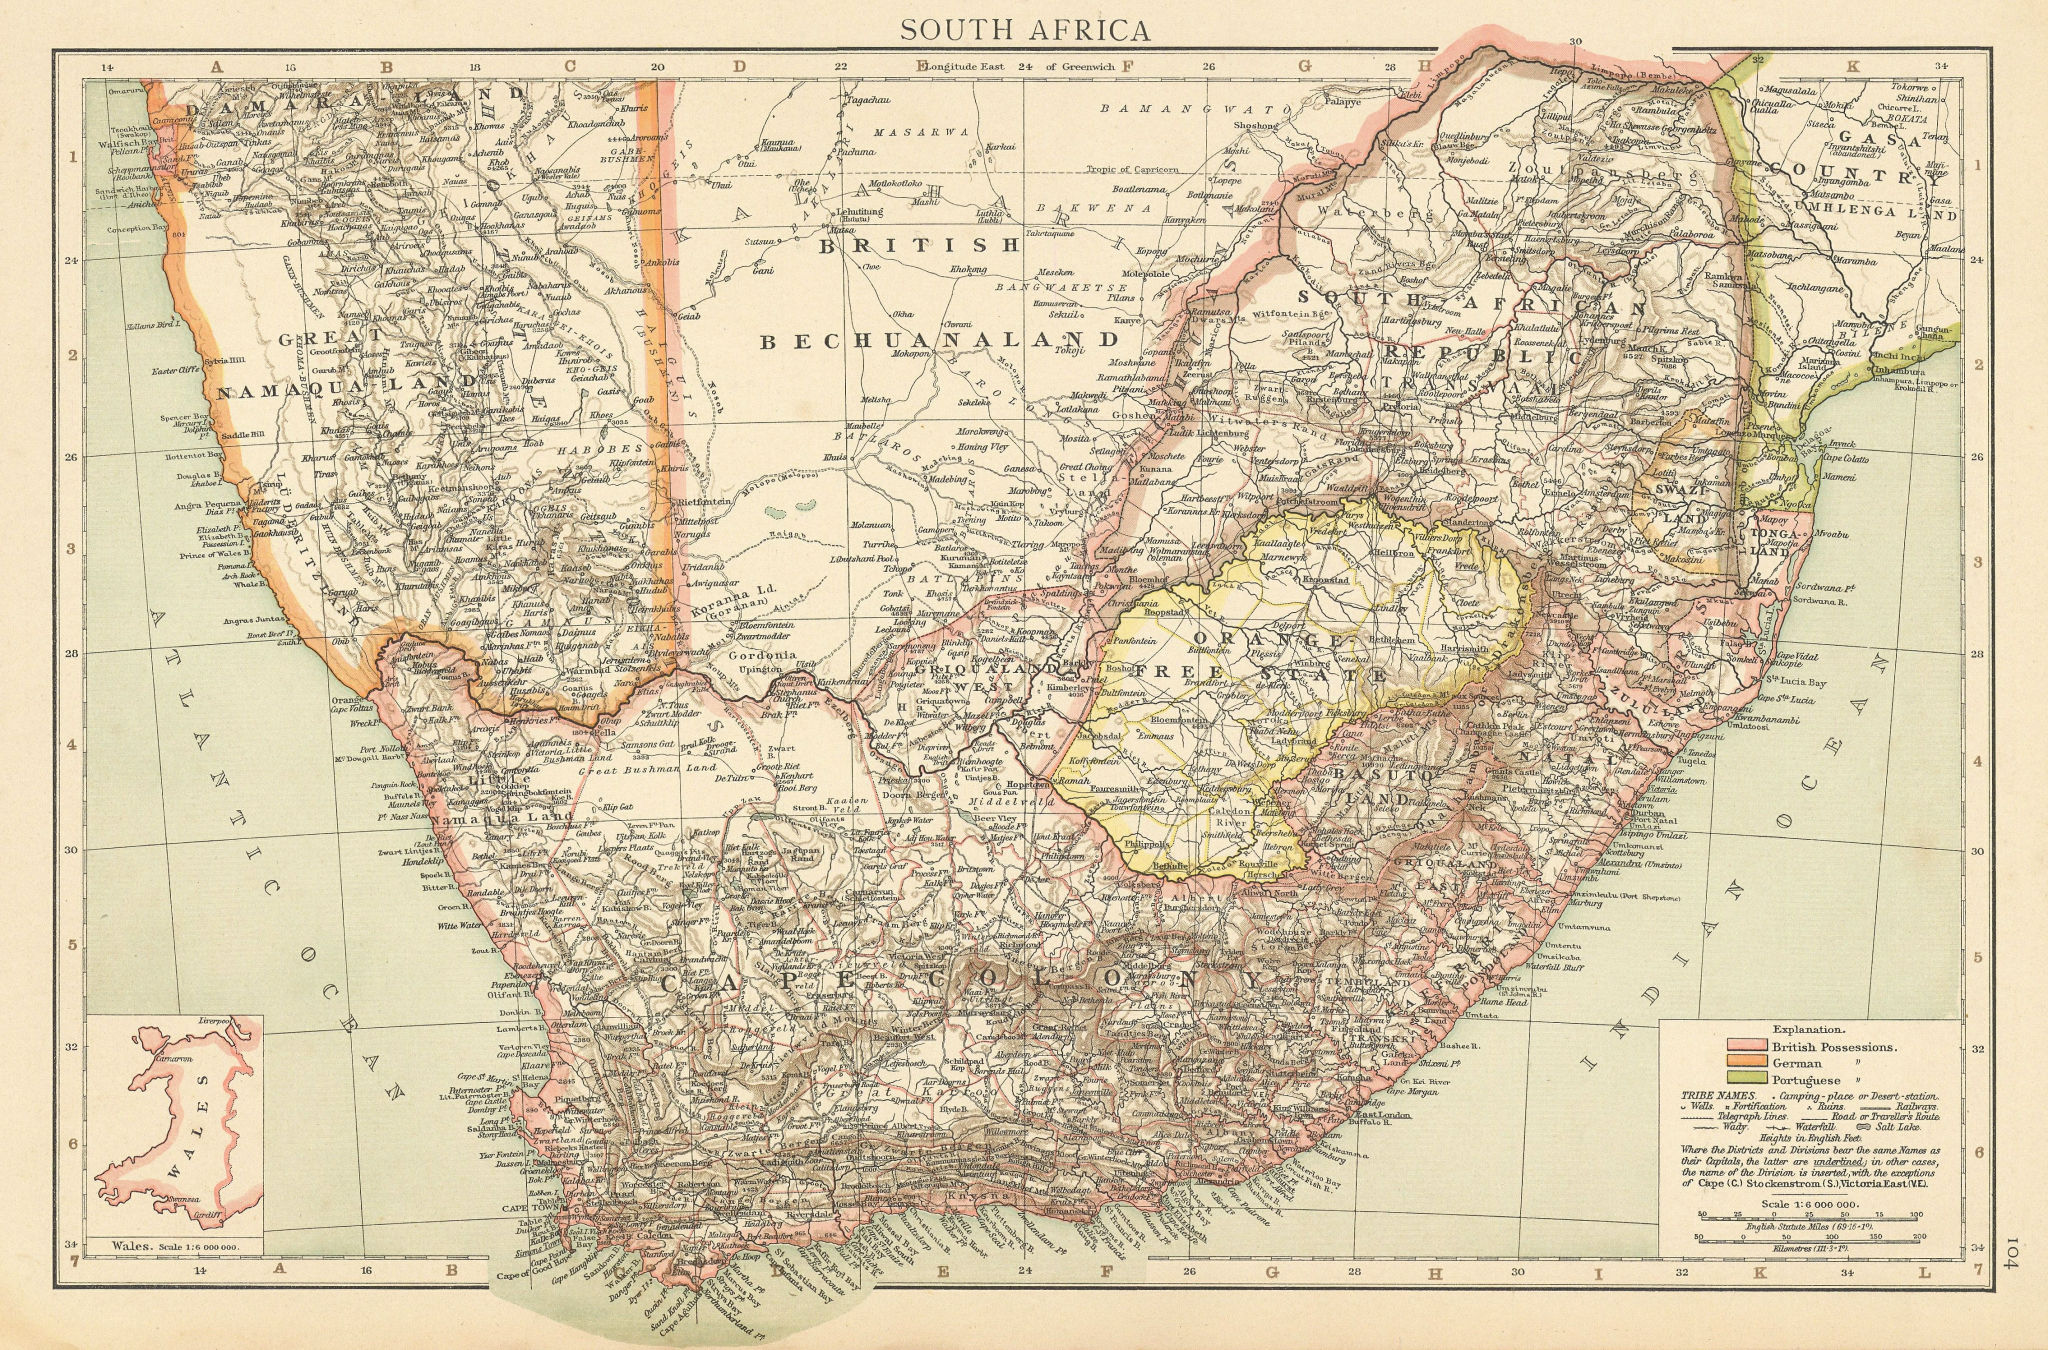 Colonial Southern Africa. Namaqua-Land Bechuanaland. Cape Colony. TIMES 1895 map